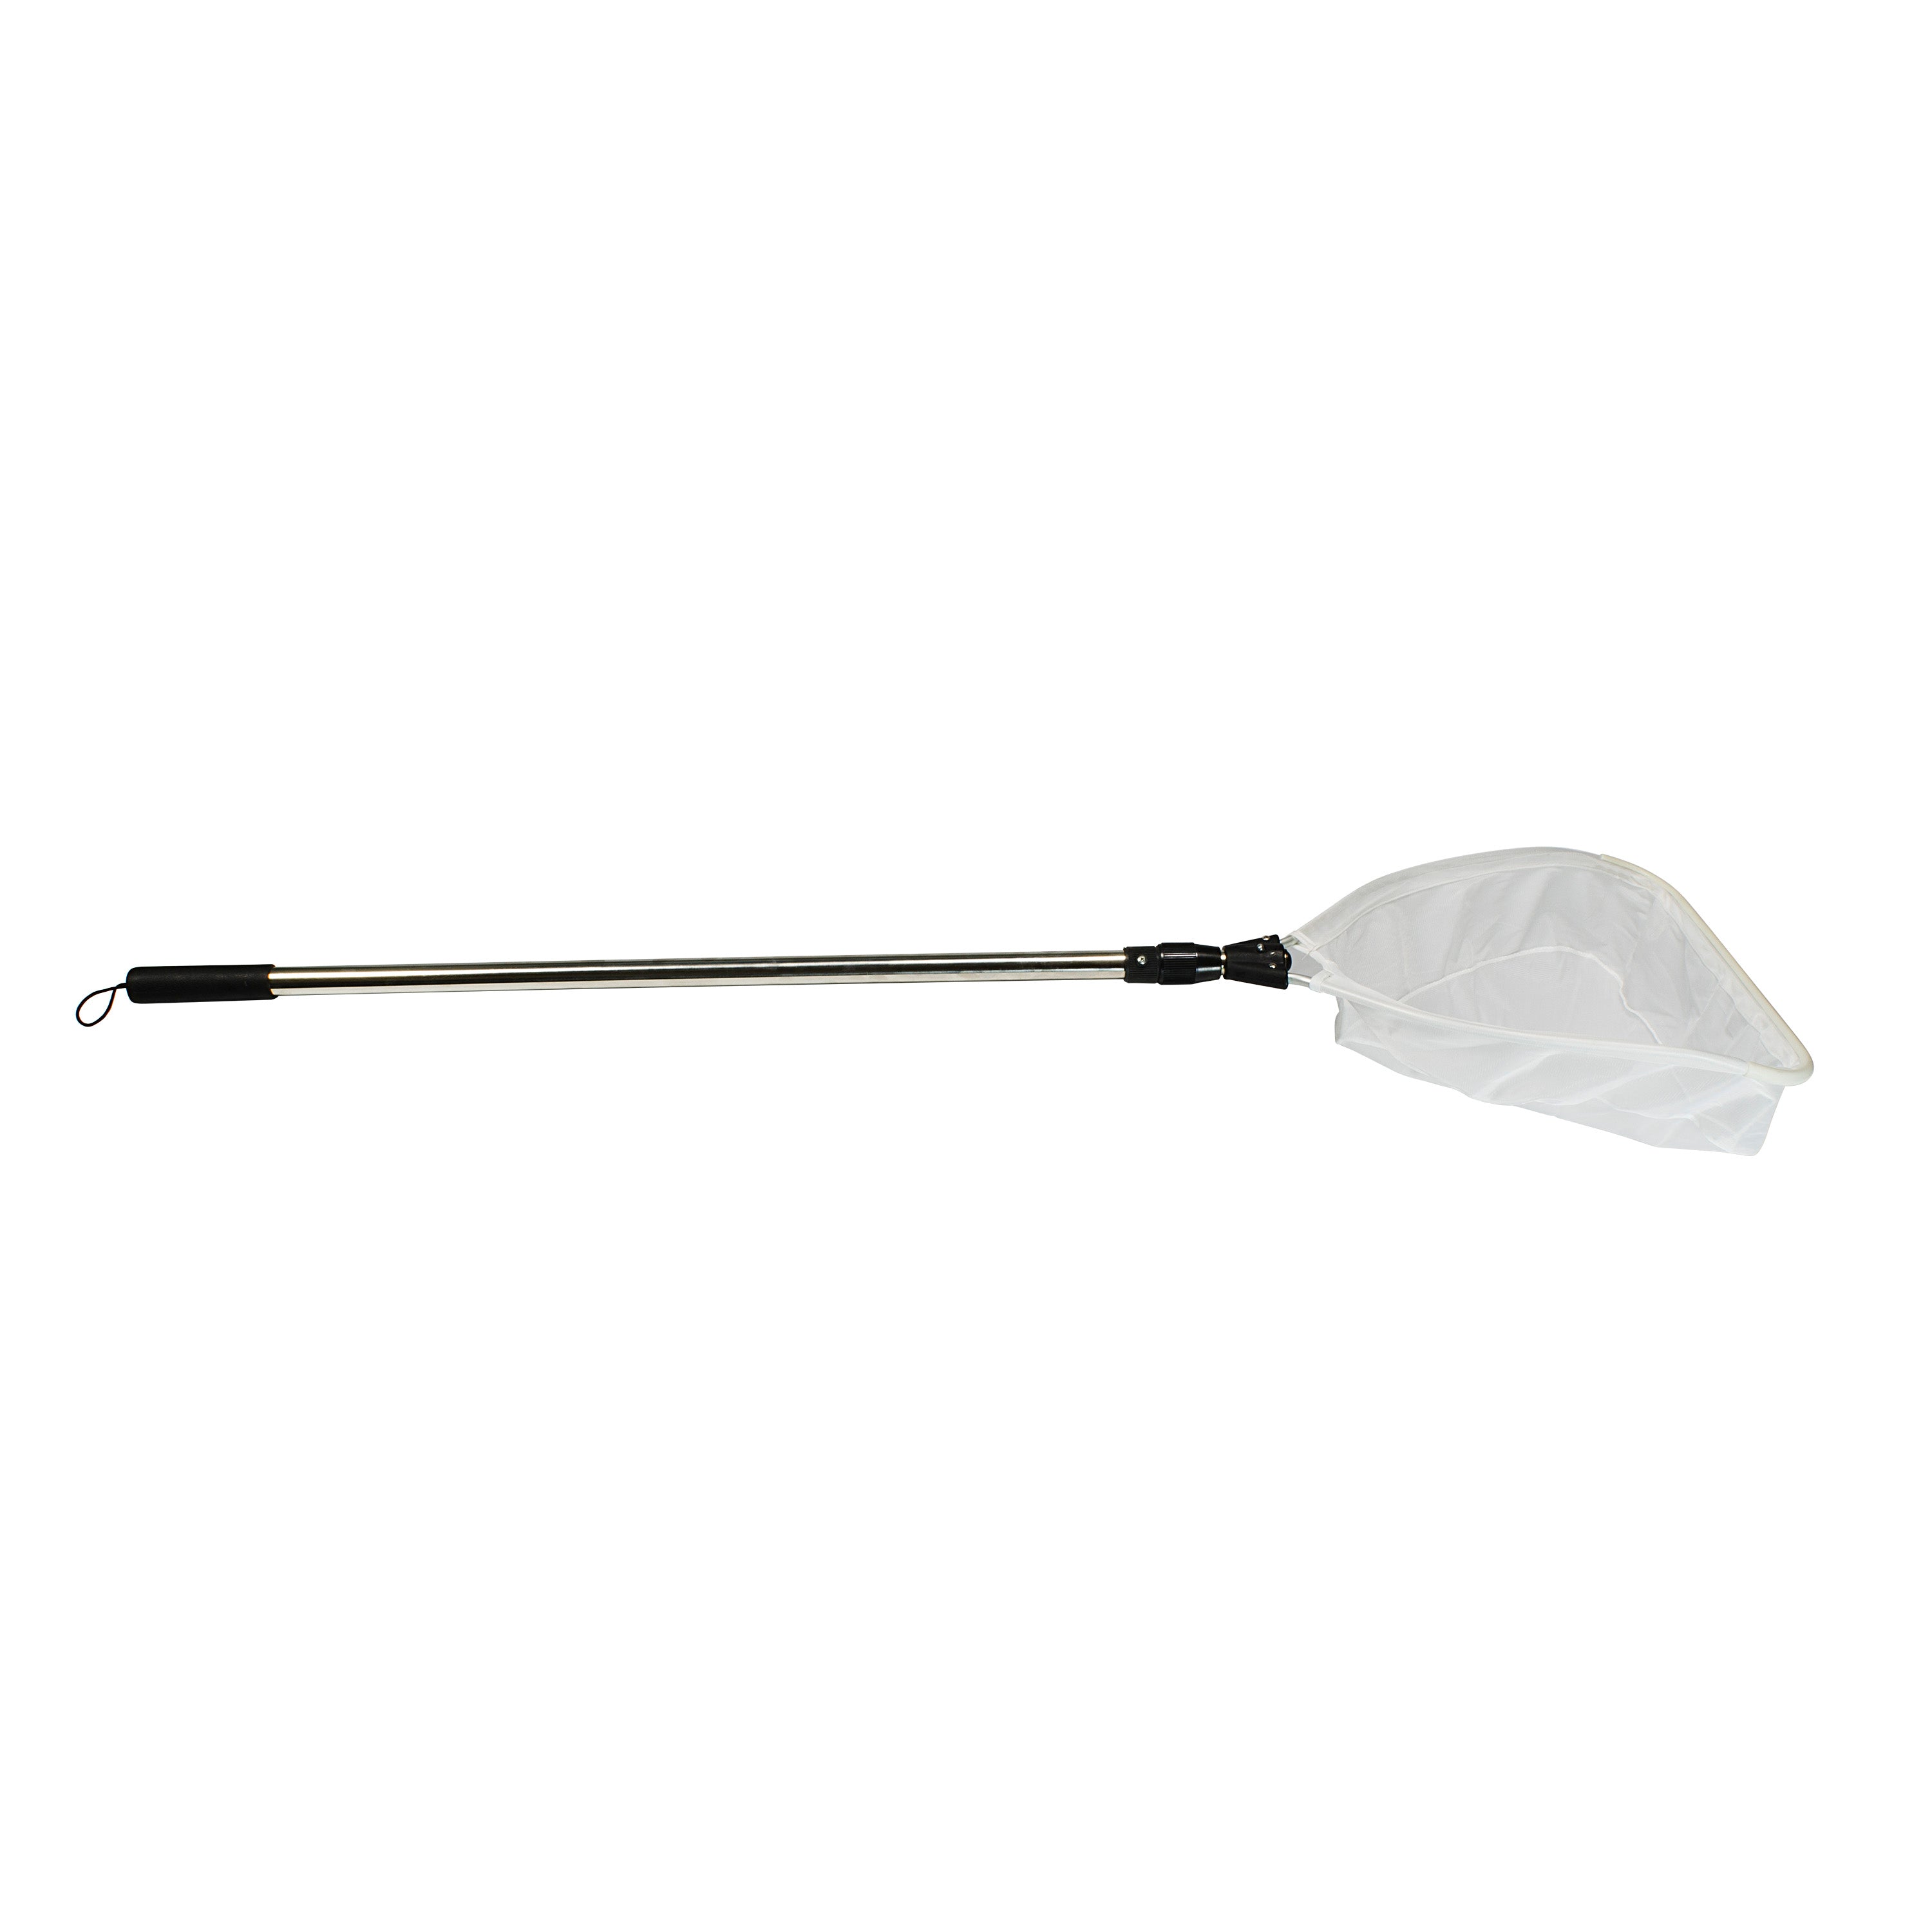 Heavy Duty Pond Net With Extendable Handle